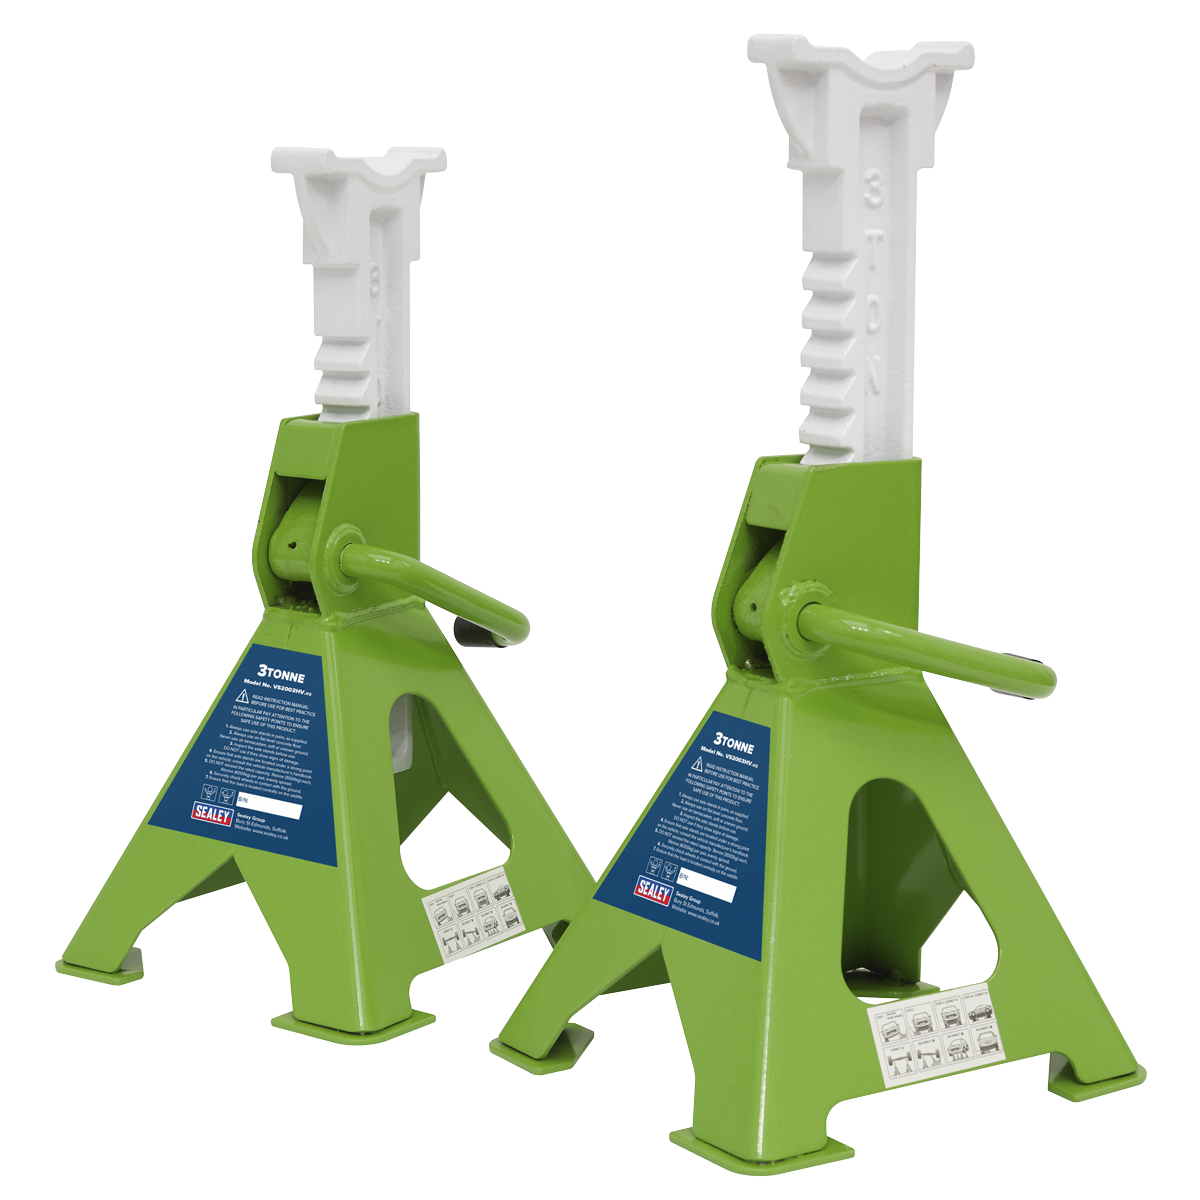 Sealey Axle Stands (Pair) 3 Tonne Capacity per Stand Ratchet Type - Hi-Vis Green